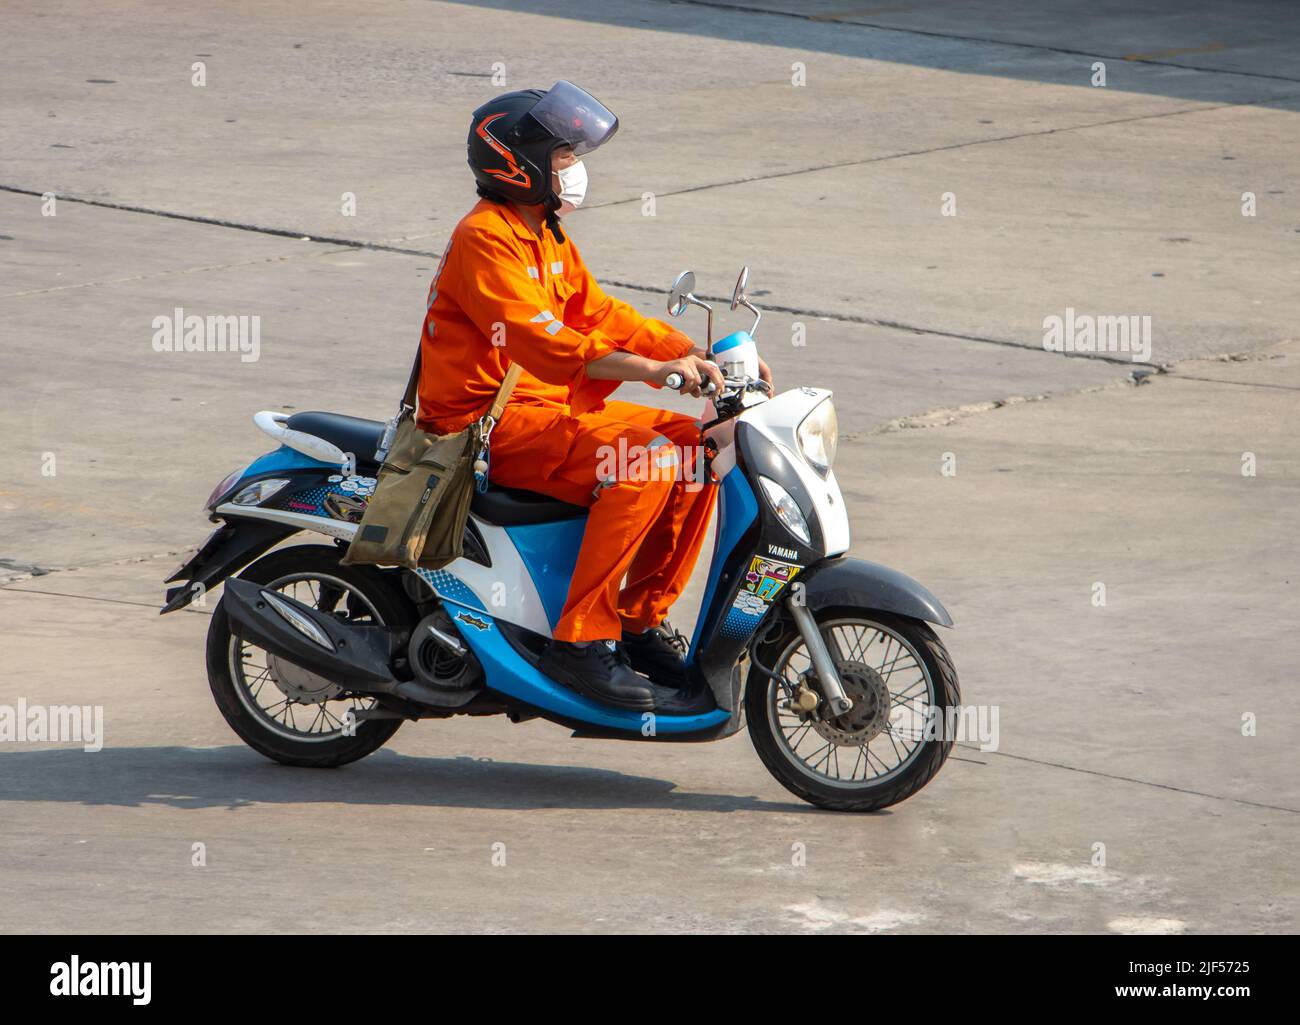 SAMUT PRAKAN,  THAILAND, APR 07 2022, A man dressed in orange overall rides a motorcycle on the city road Stock Photo